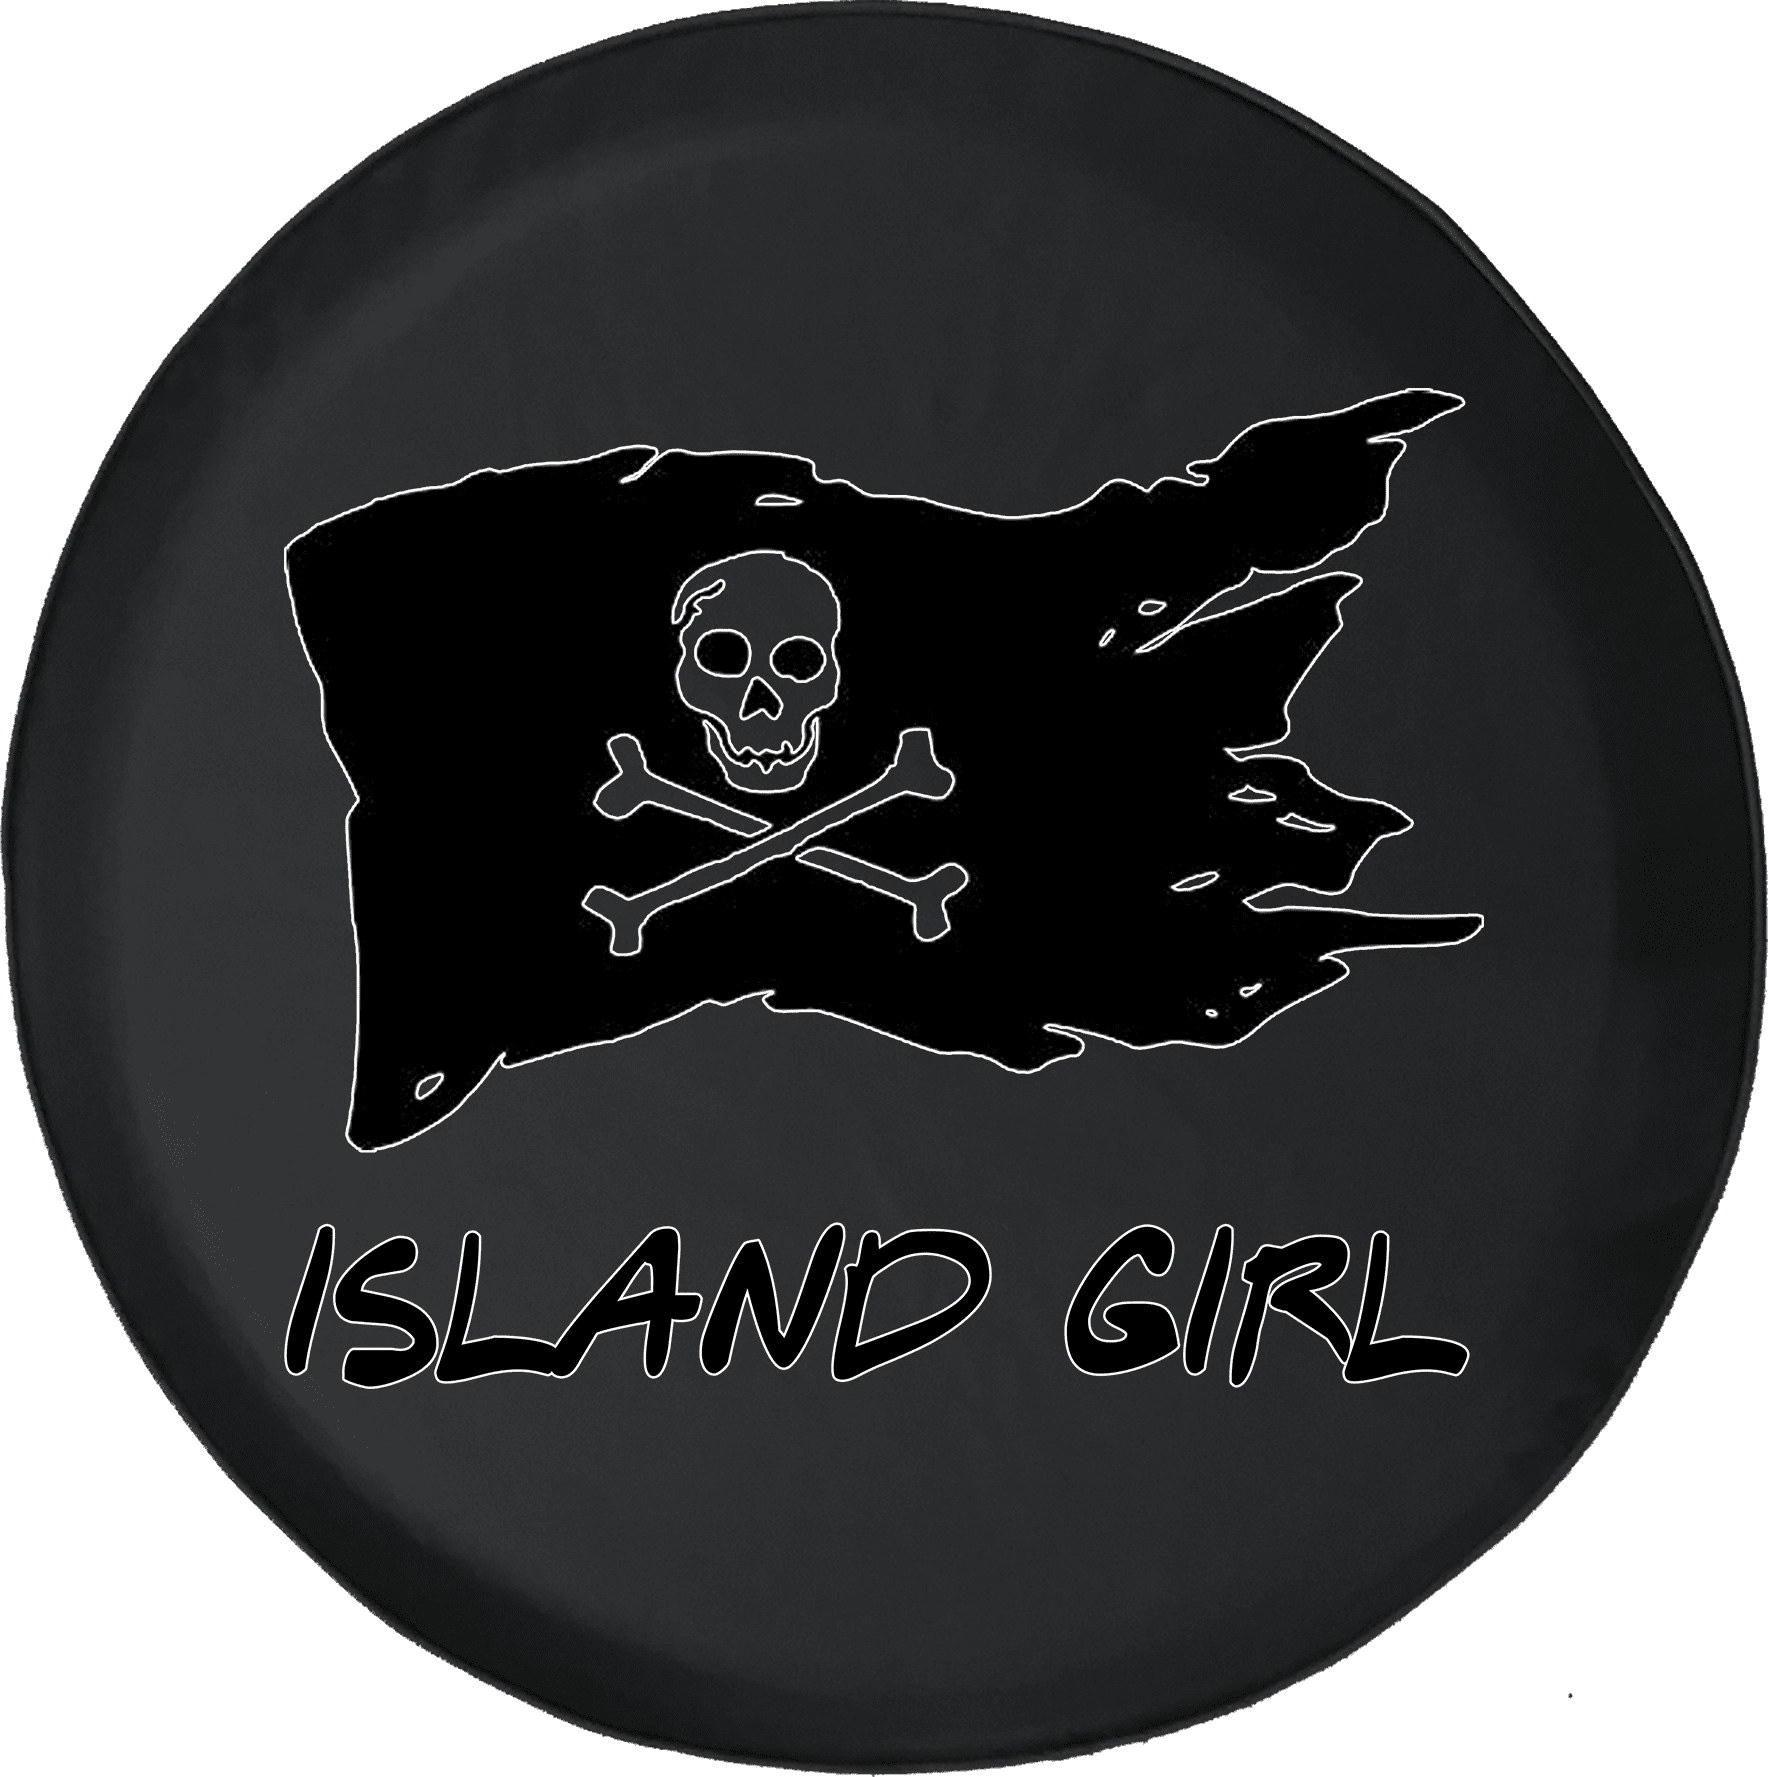 Various Designs Pirate Flag Spare Wheel Cover 4x4 Graphic Sticker Laminated 